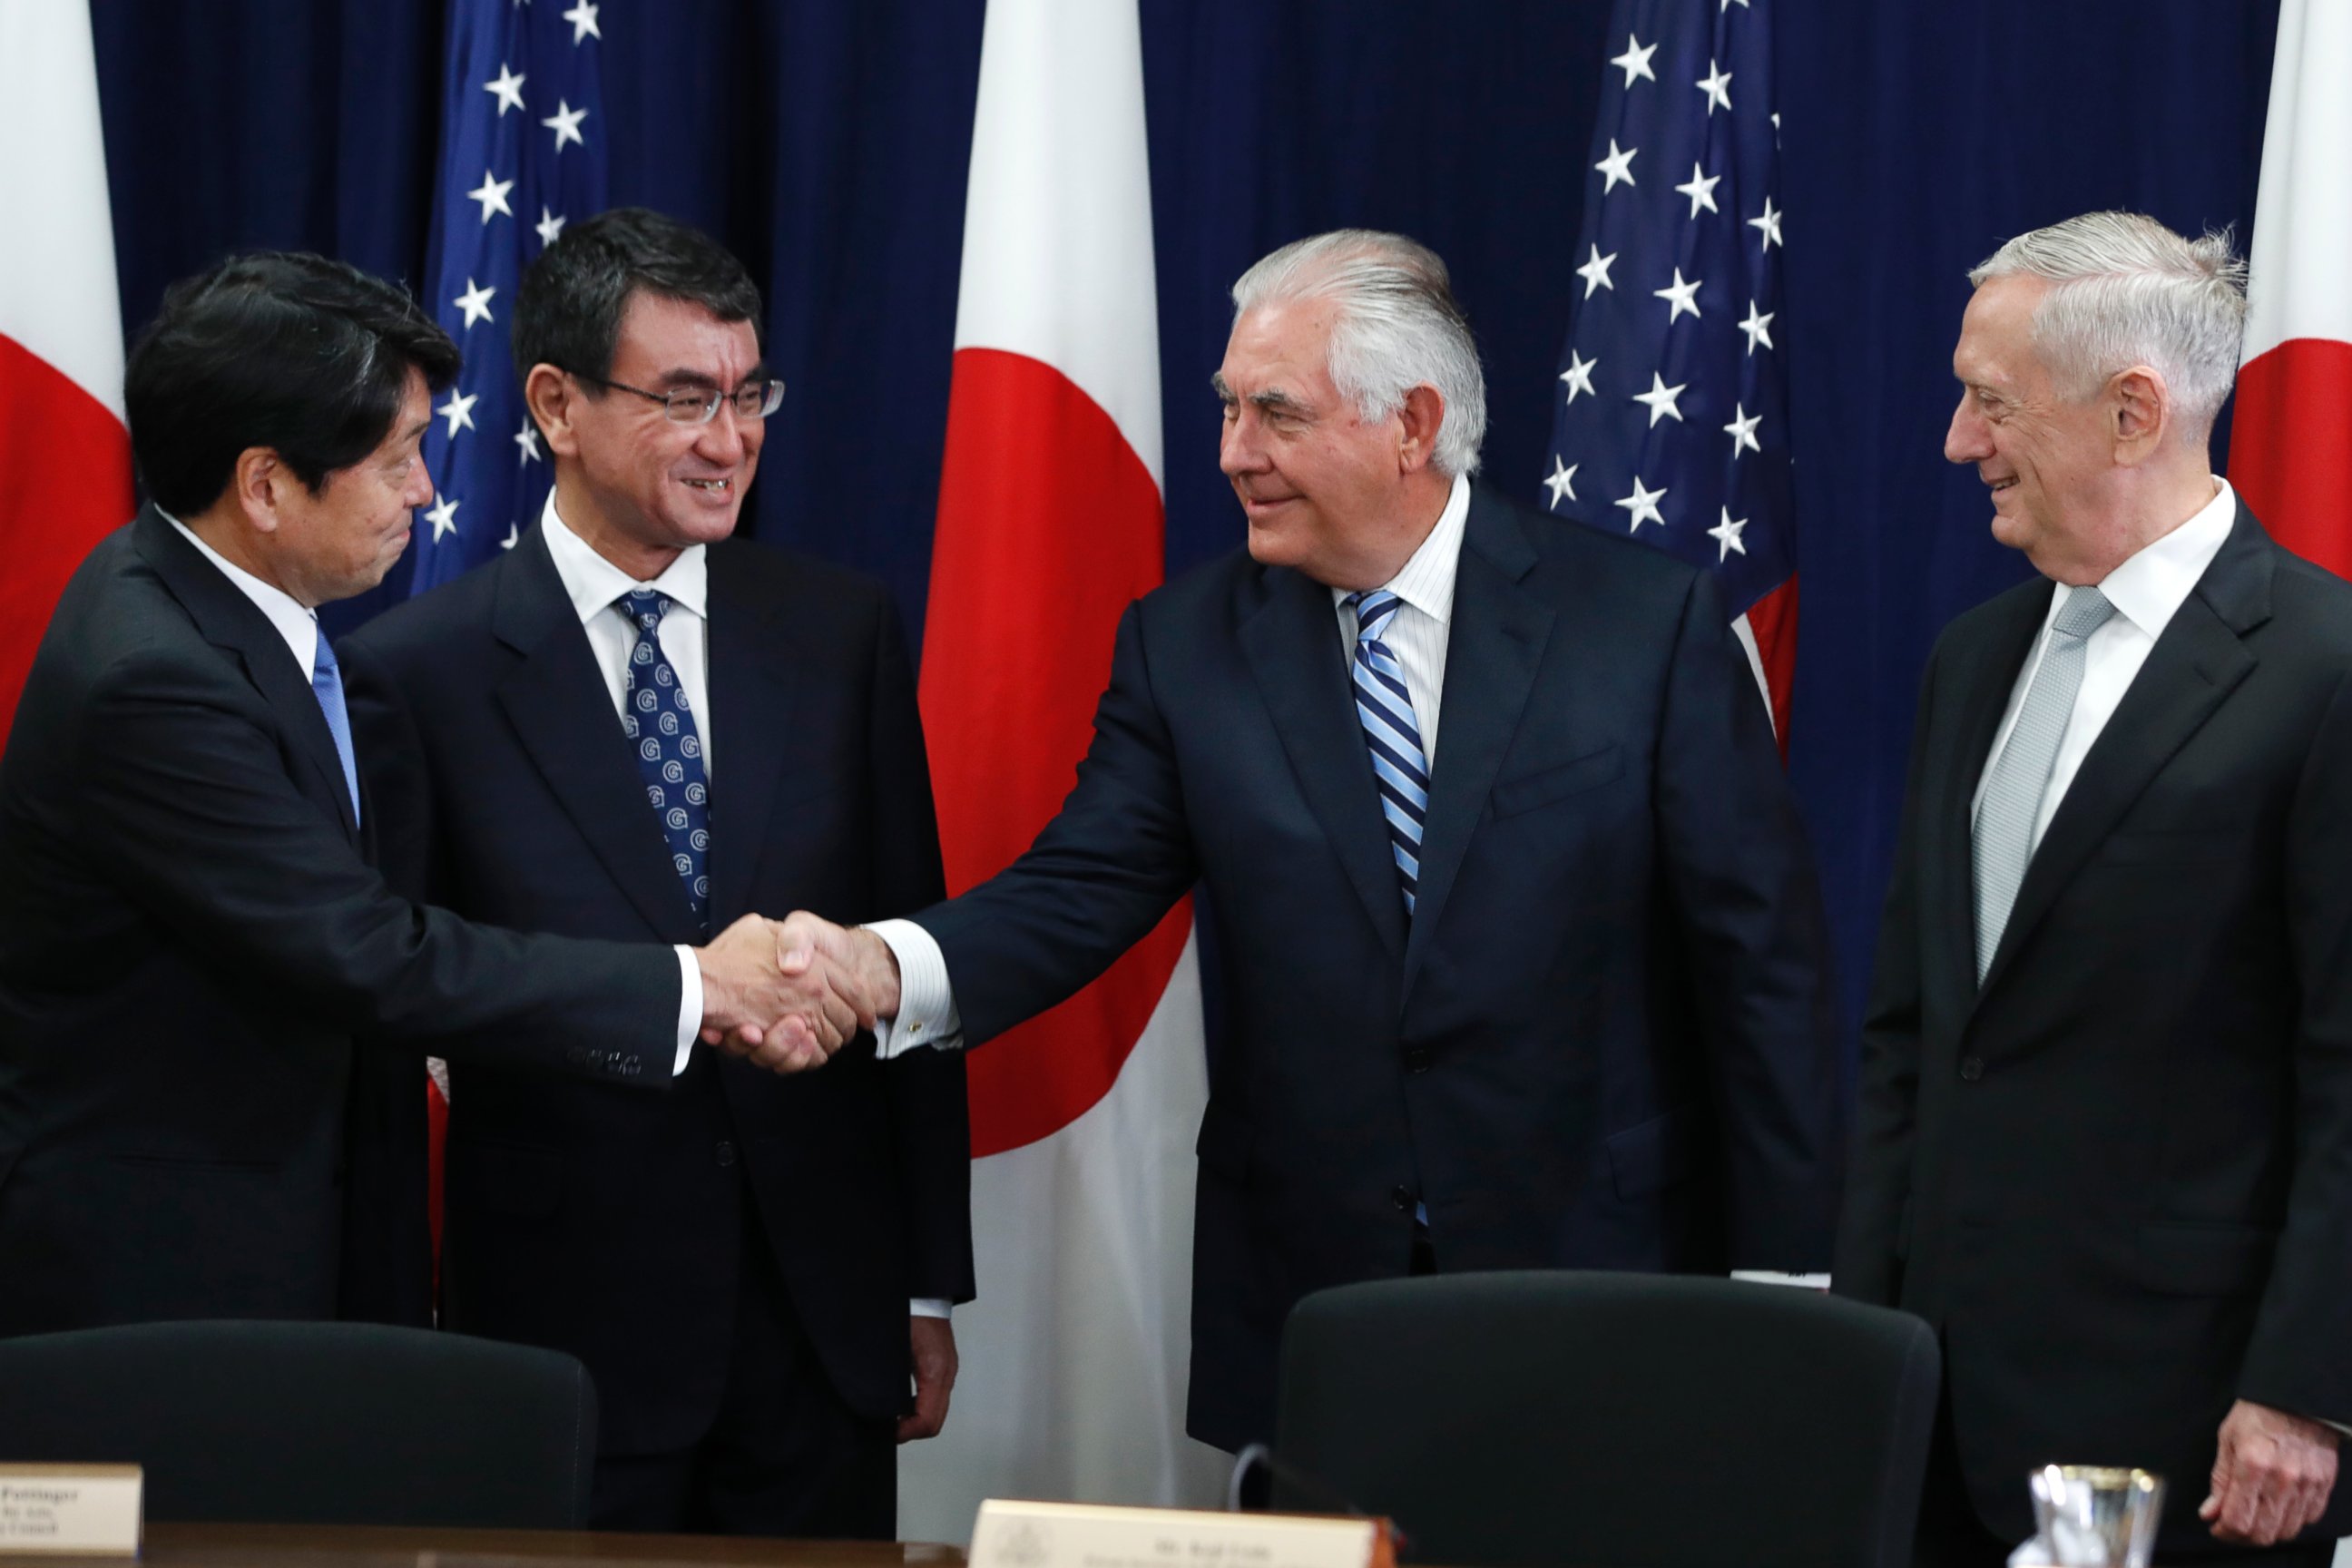 Japanese Defense Minister Itsunori Onodera, left, next to Japanese Foreign Minister Taro Kono, shakes hands with Secretary of State Rex Tillerson, at the start of a Security Consultative Committee meeting, Thursday, Aug. 17, 2017.